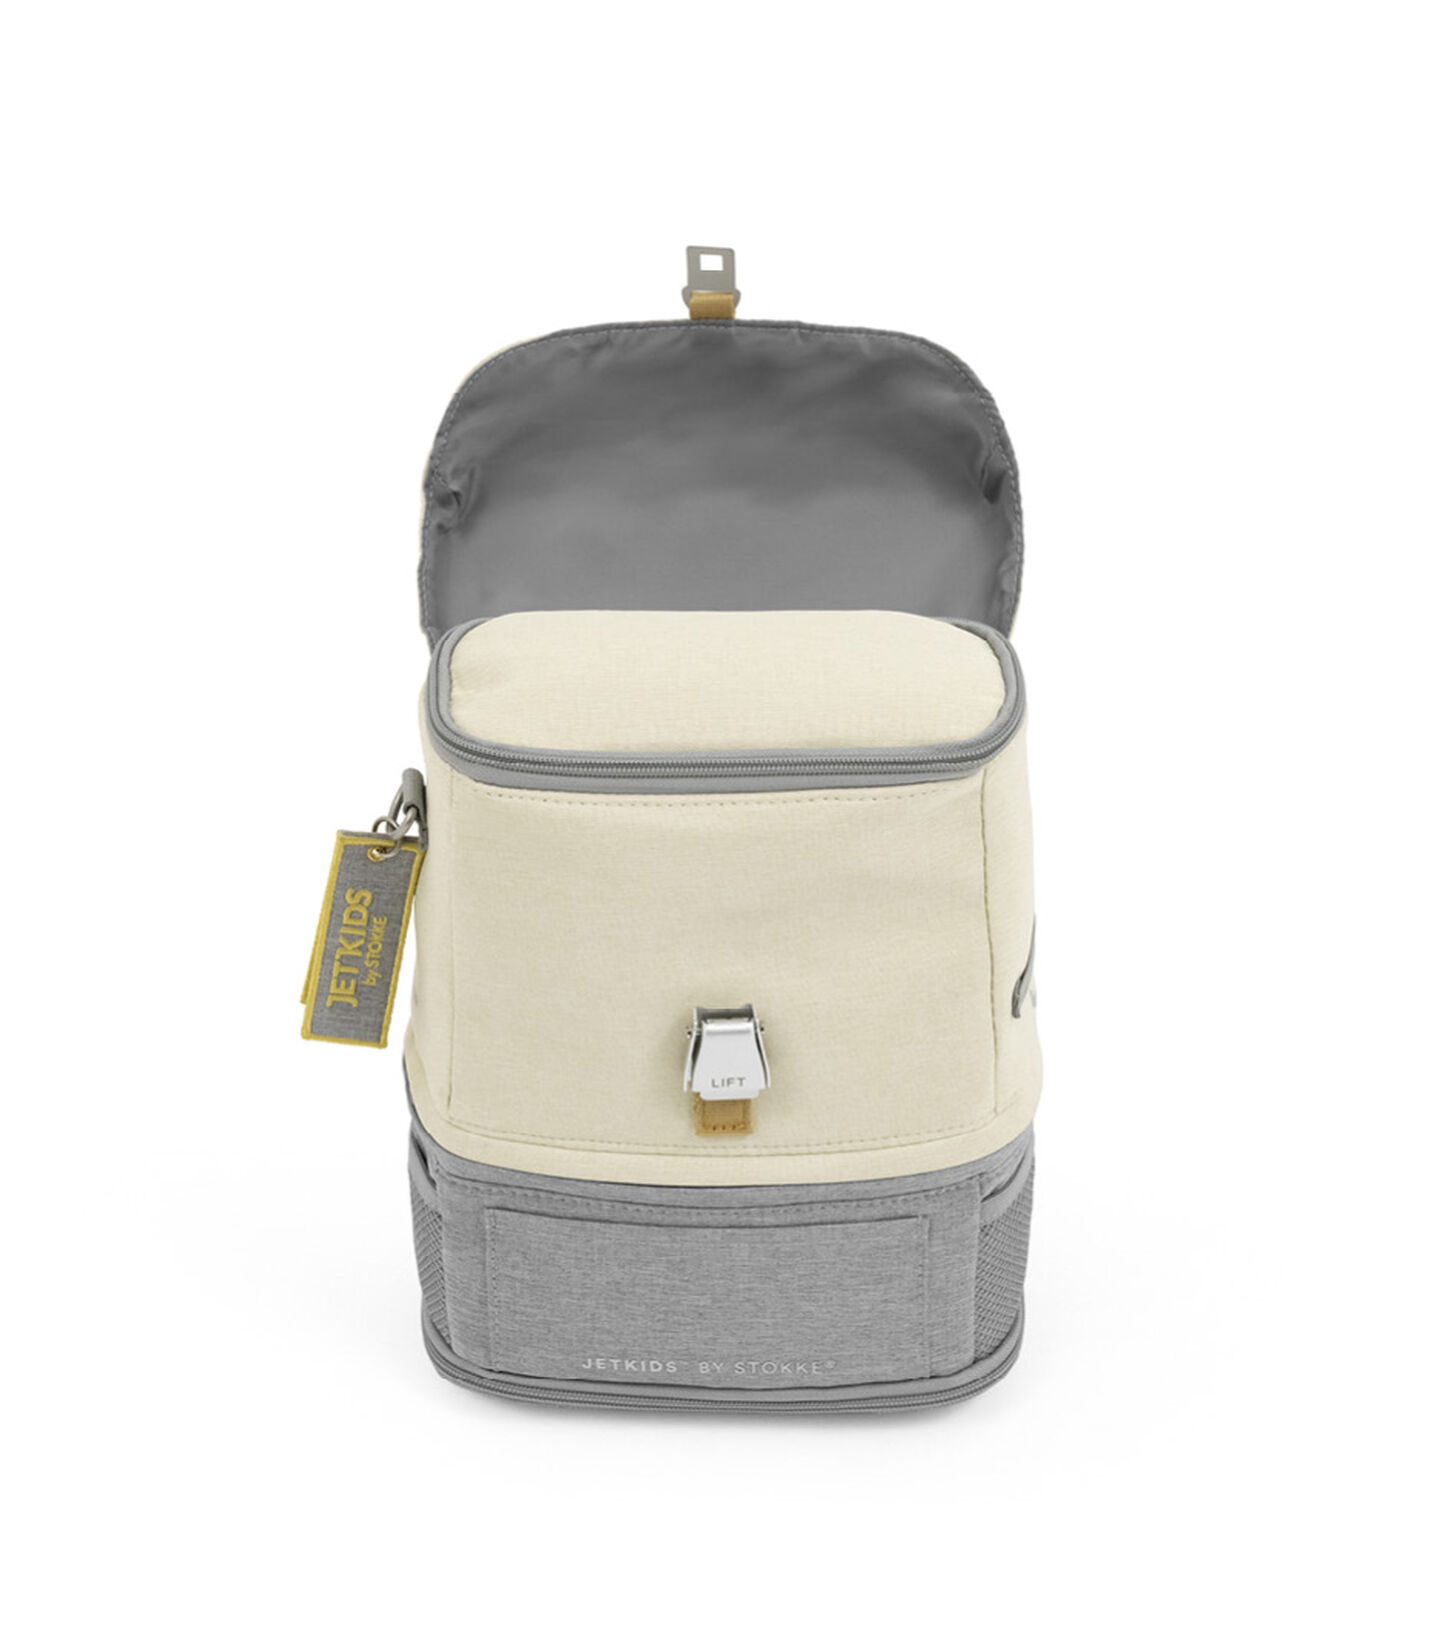 JetKids™ by Stokke® Crew BackPack in Full Moon White. view 9